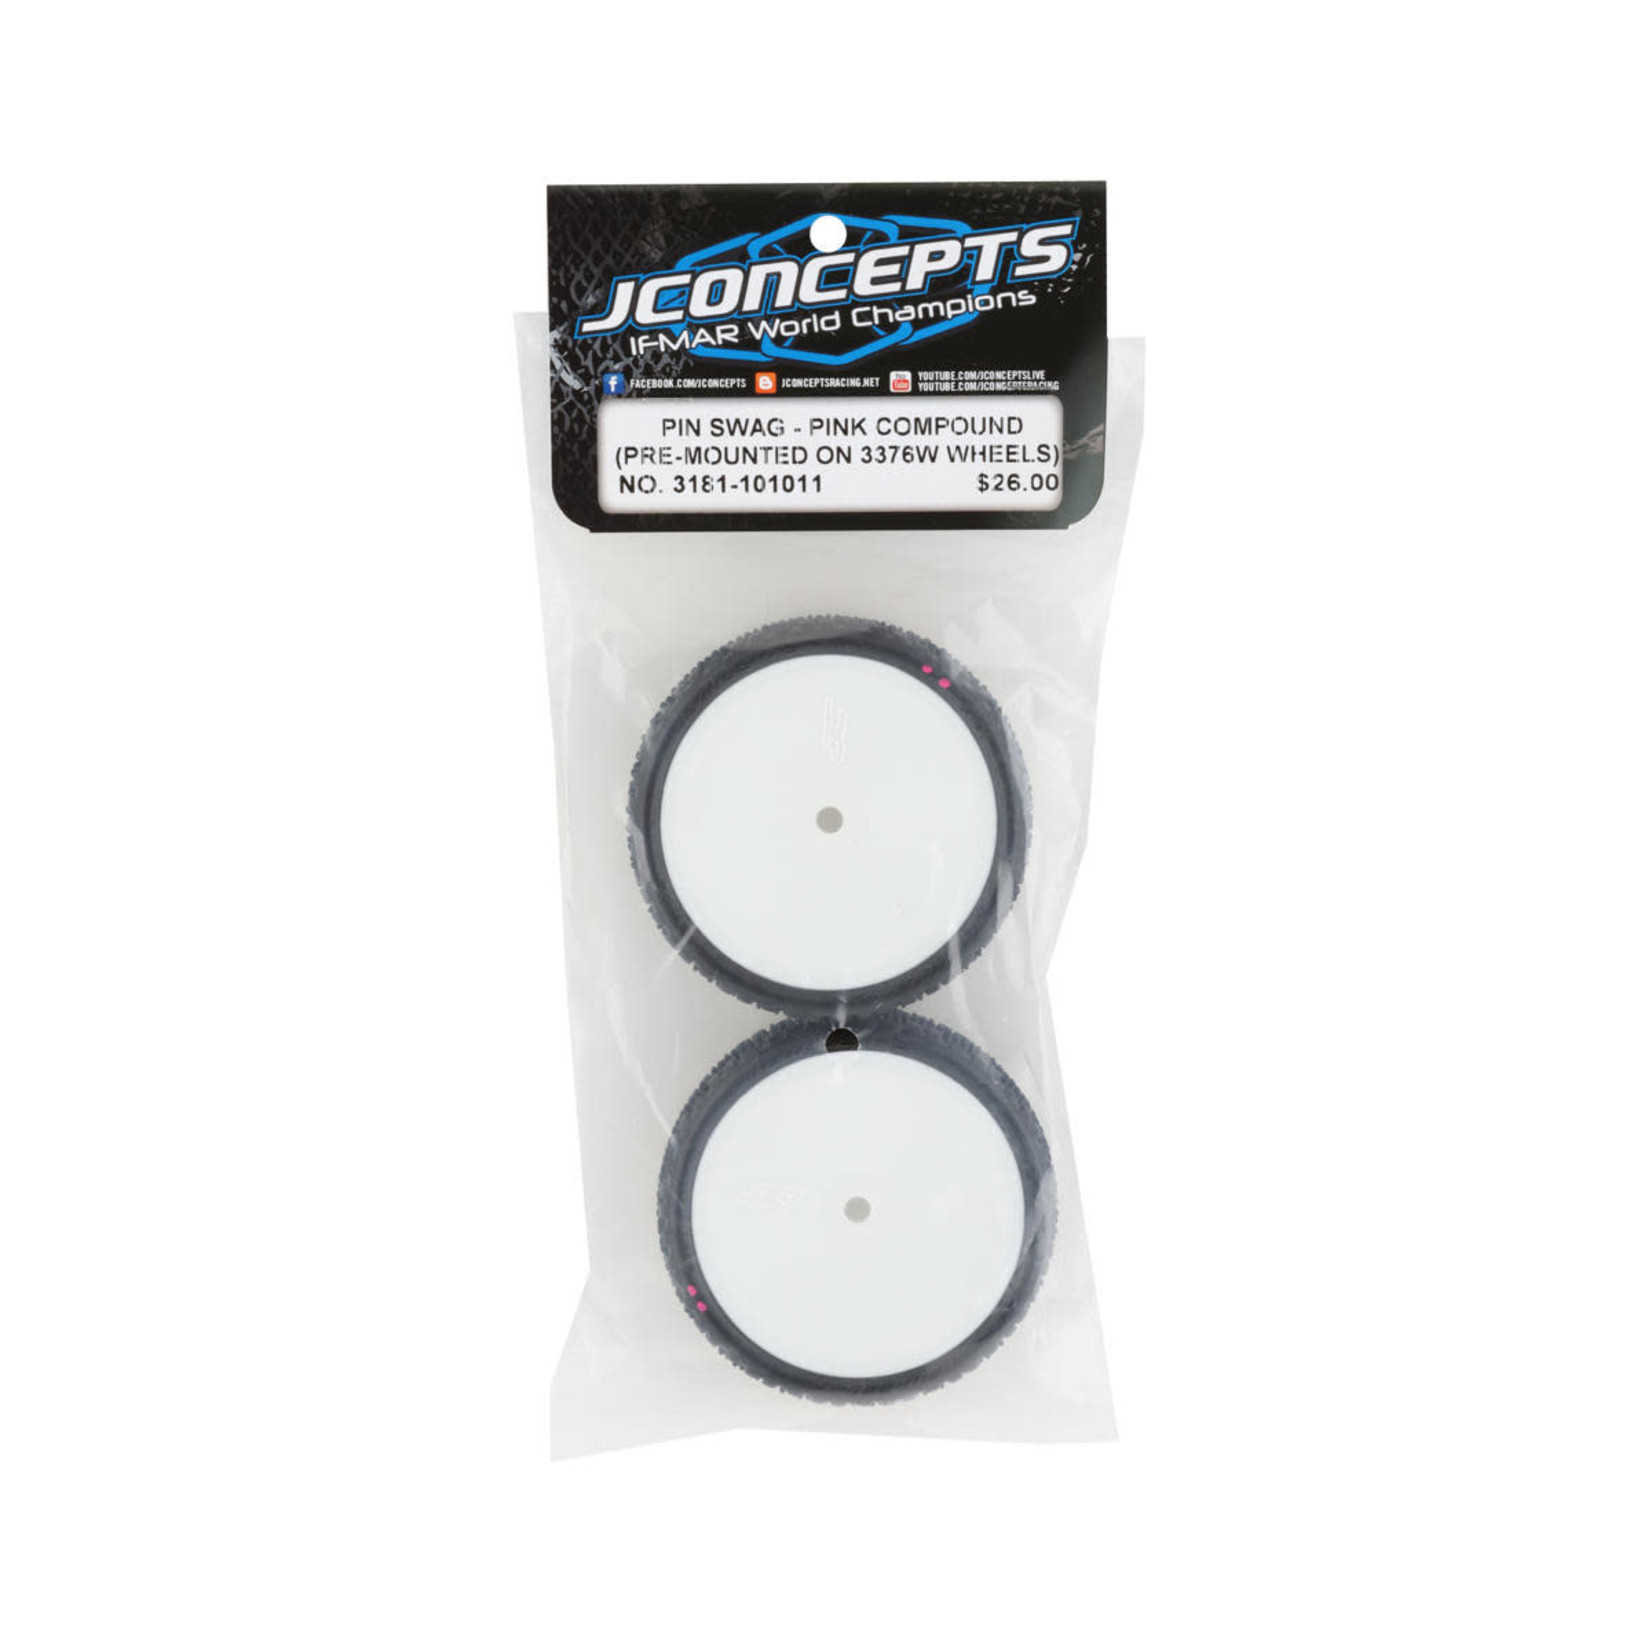 JConcepts JConcepts Pin Swag 2.2" Pre-Mounted 2WD Front Buggy Carpet Tires (White) (2) (Pink) w/12mm Hex #3181-101011